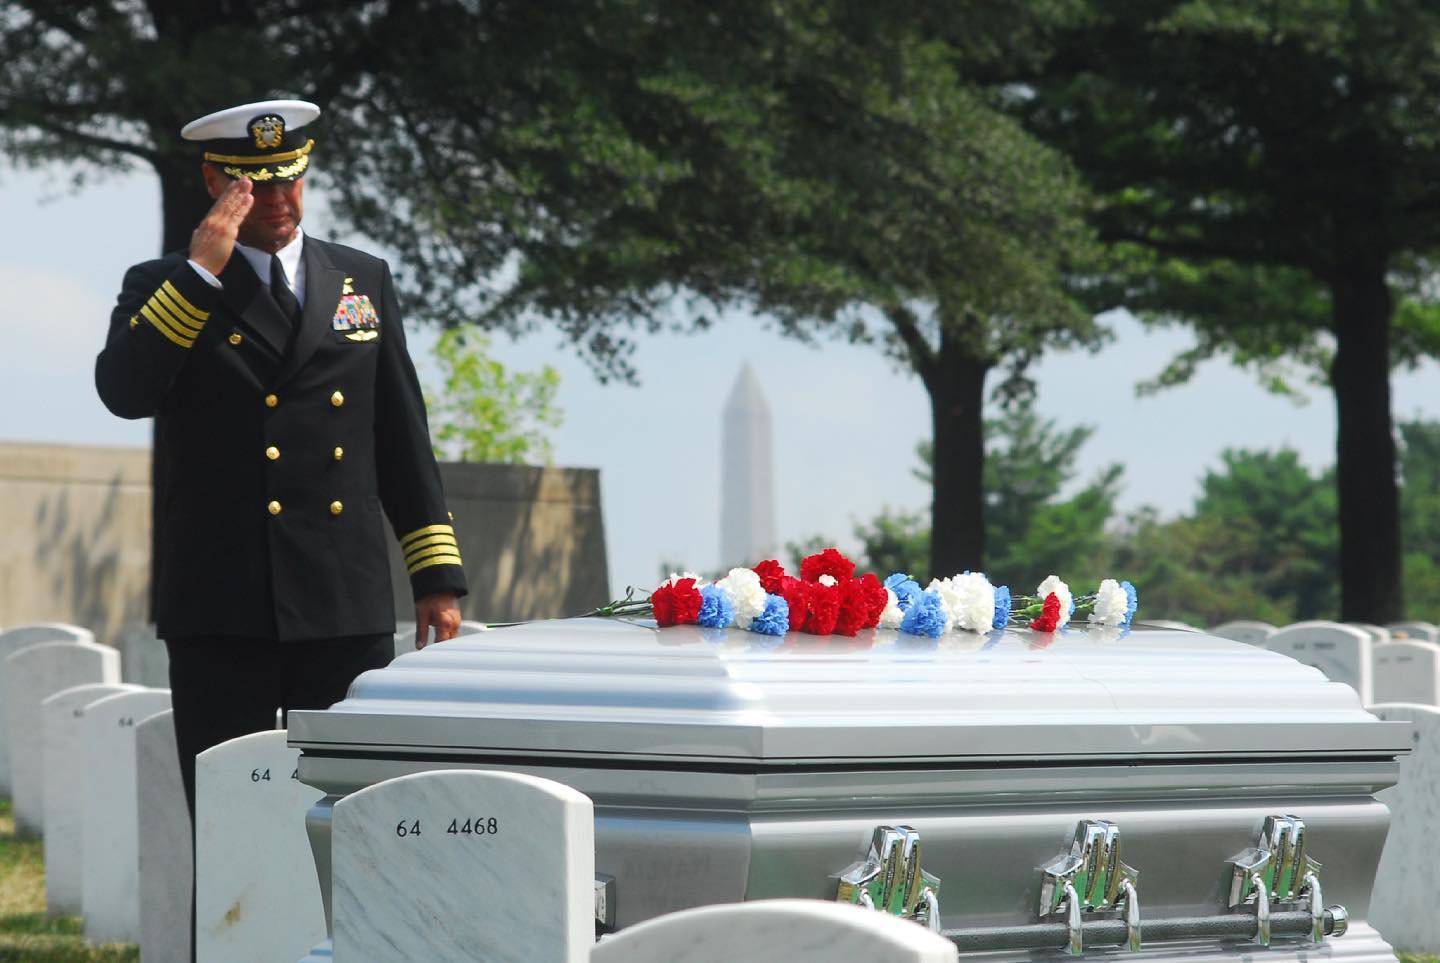 A US Navy Captain salutes the remains of an honored veteran, laid to rest in Section 64 of Arlington National Cemetery. 

Captured by @arlingtonmedia